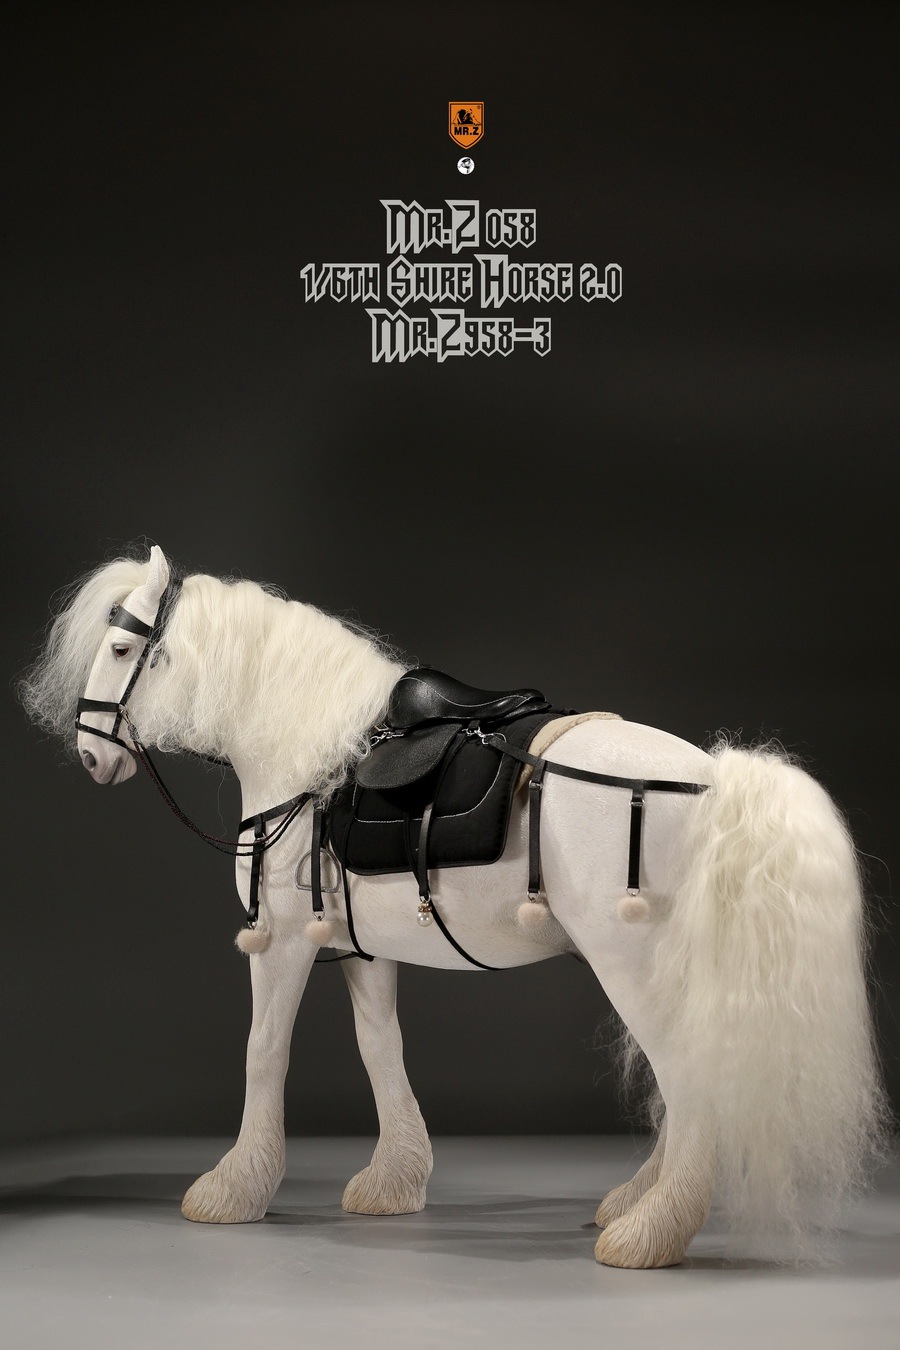 Mr - NEW PRODUCT: MR. Z: 58th round-Shire Horse 2.0 version full set of 5 colors  08575311